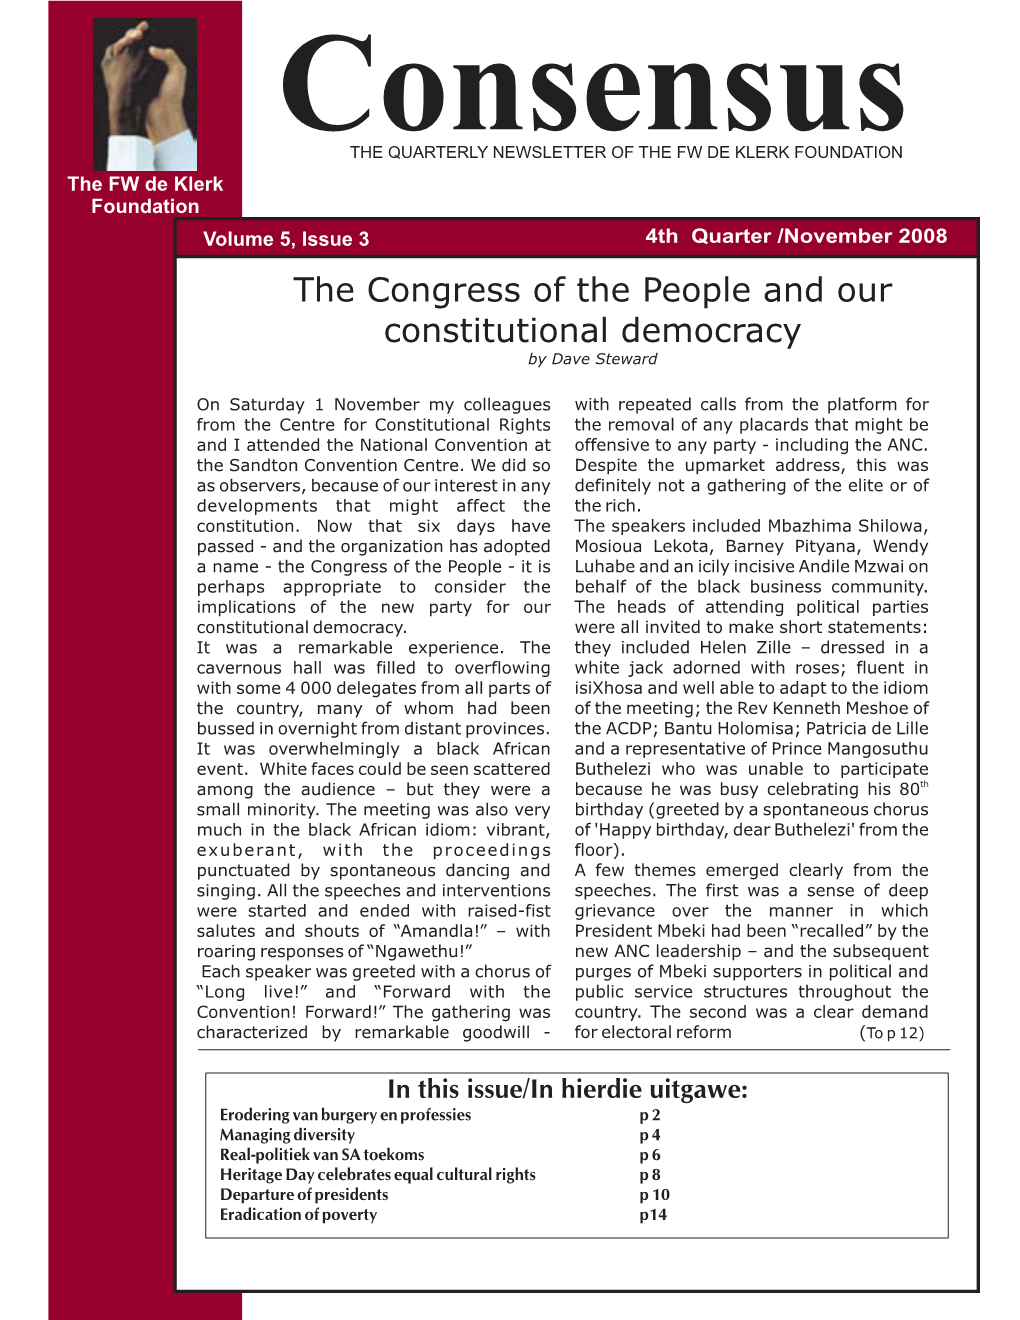 The Congress of the People and Our Constitutional Democracy by Dave Steward